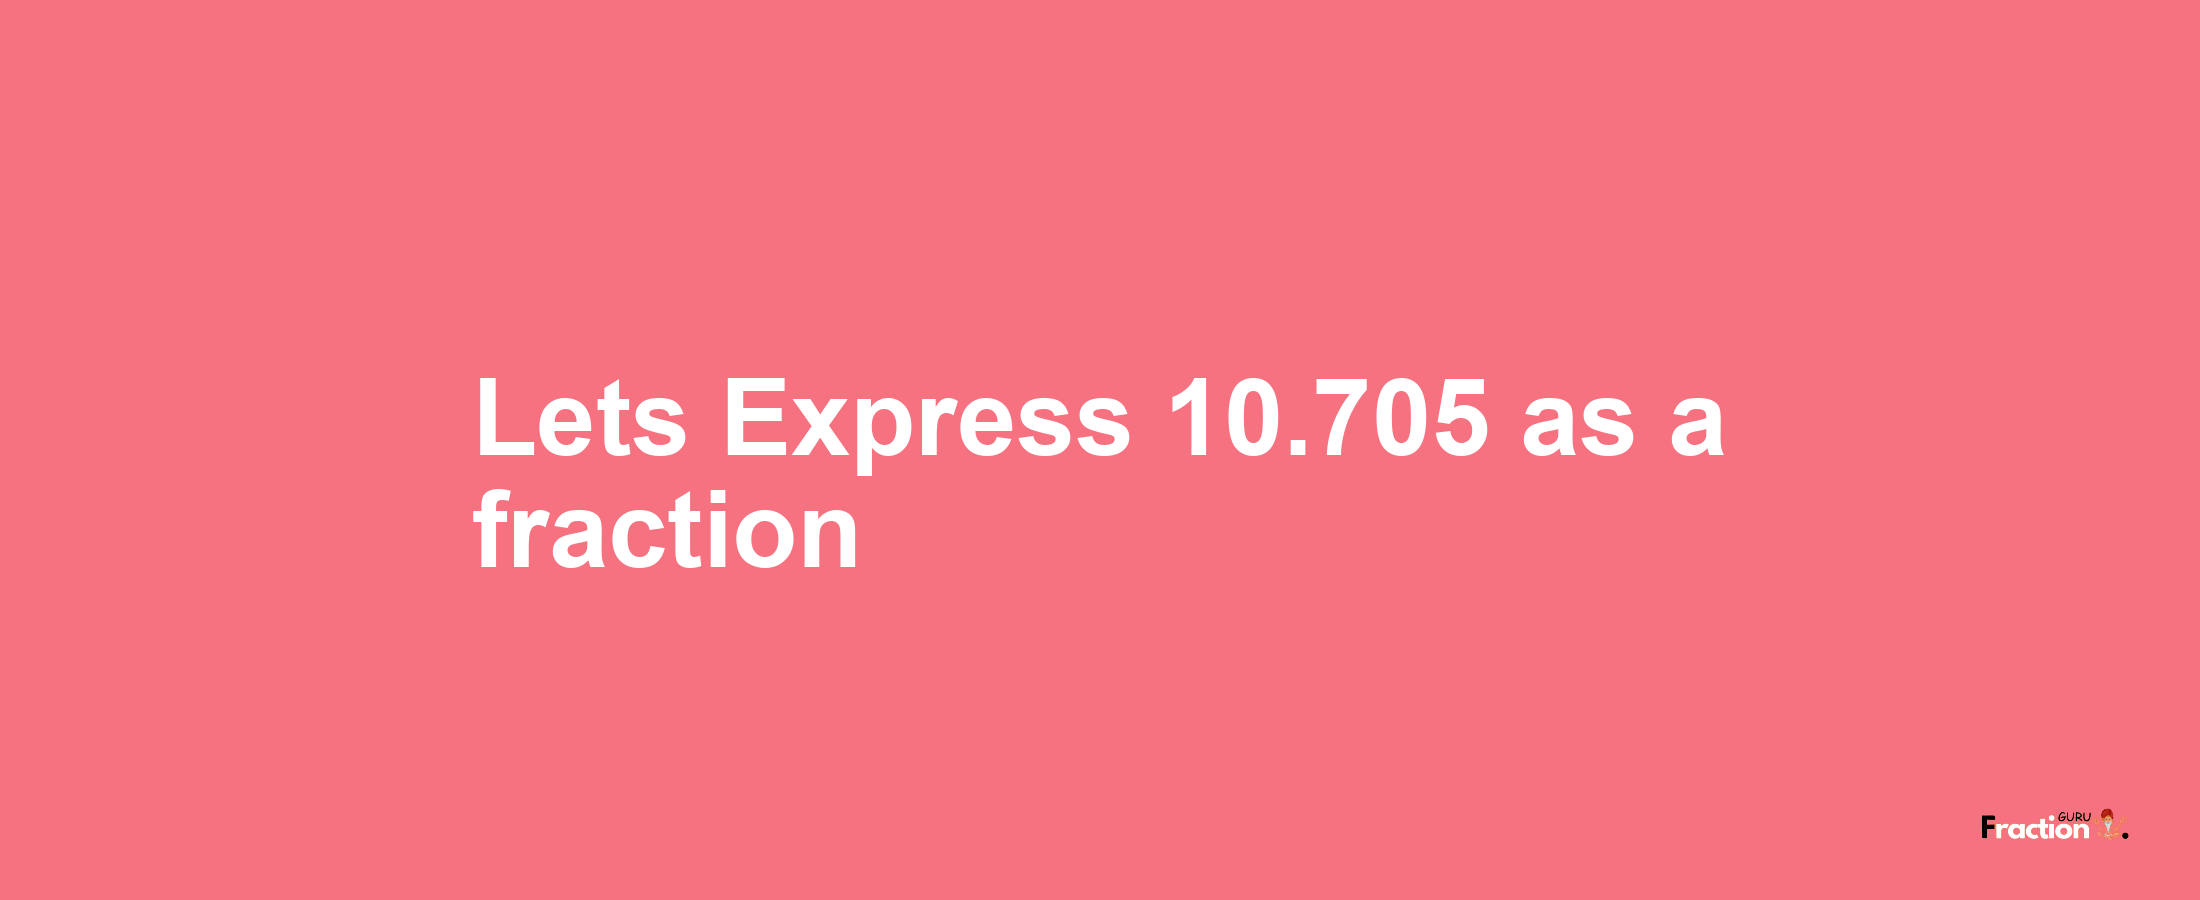 Lets Express 10.705 as afraction